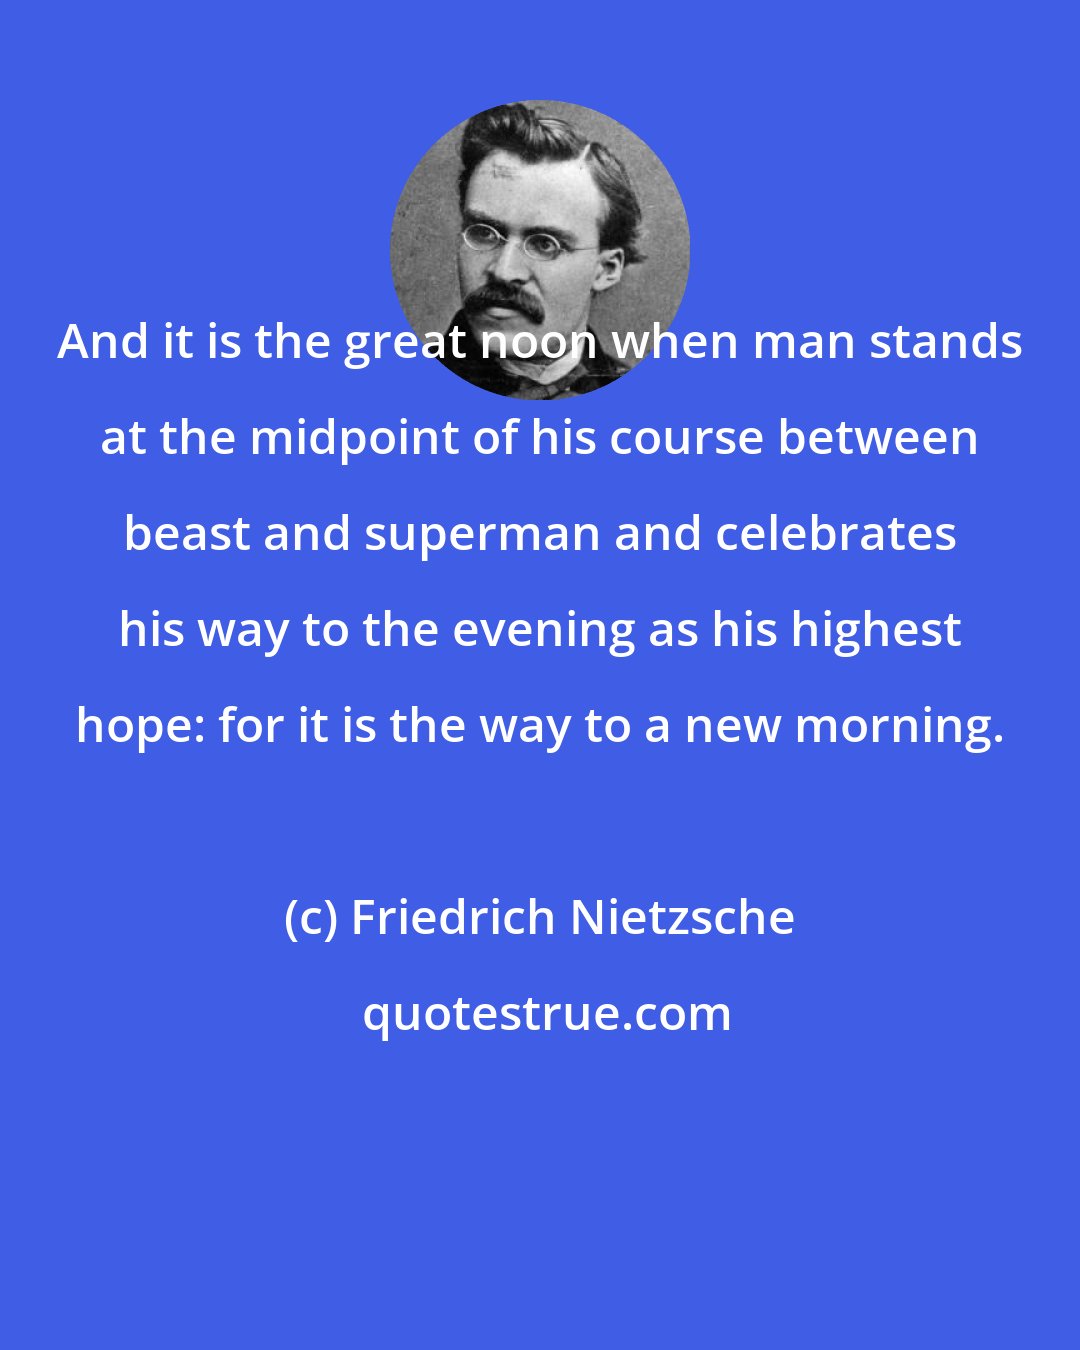 Friedrich Nietzsche: And it is the great noon when man stands at the midpoint of his course between beast and superman and celebrates his way to the evening as his highest hope: for it is the way to a new morning.